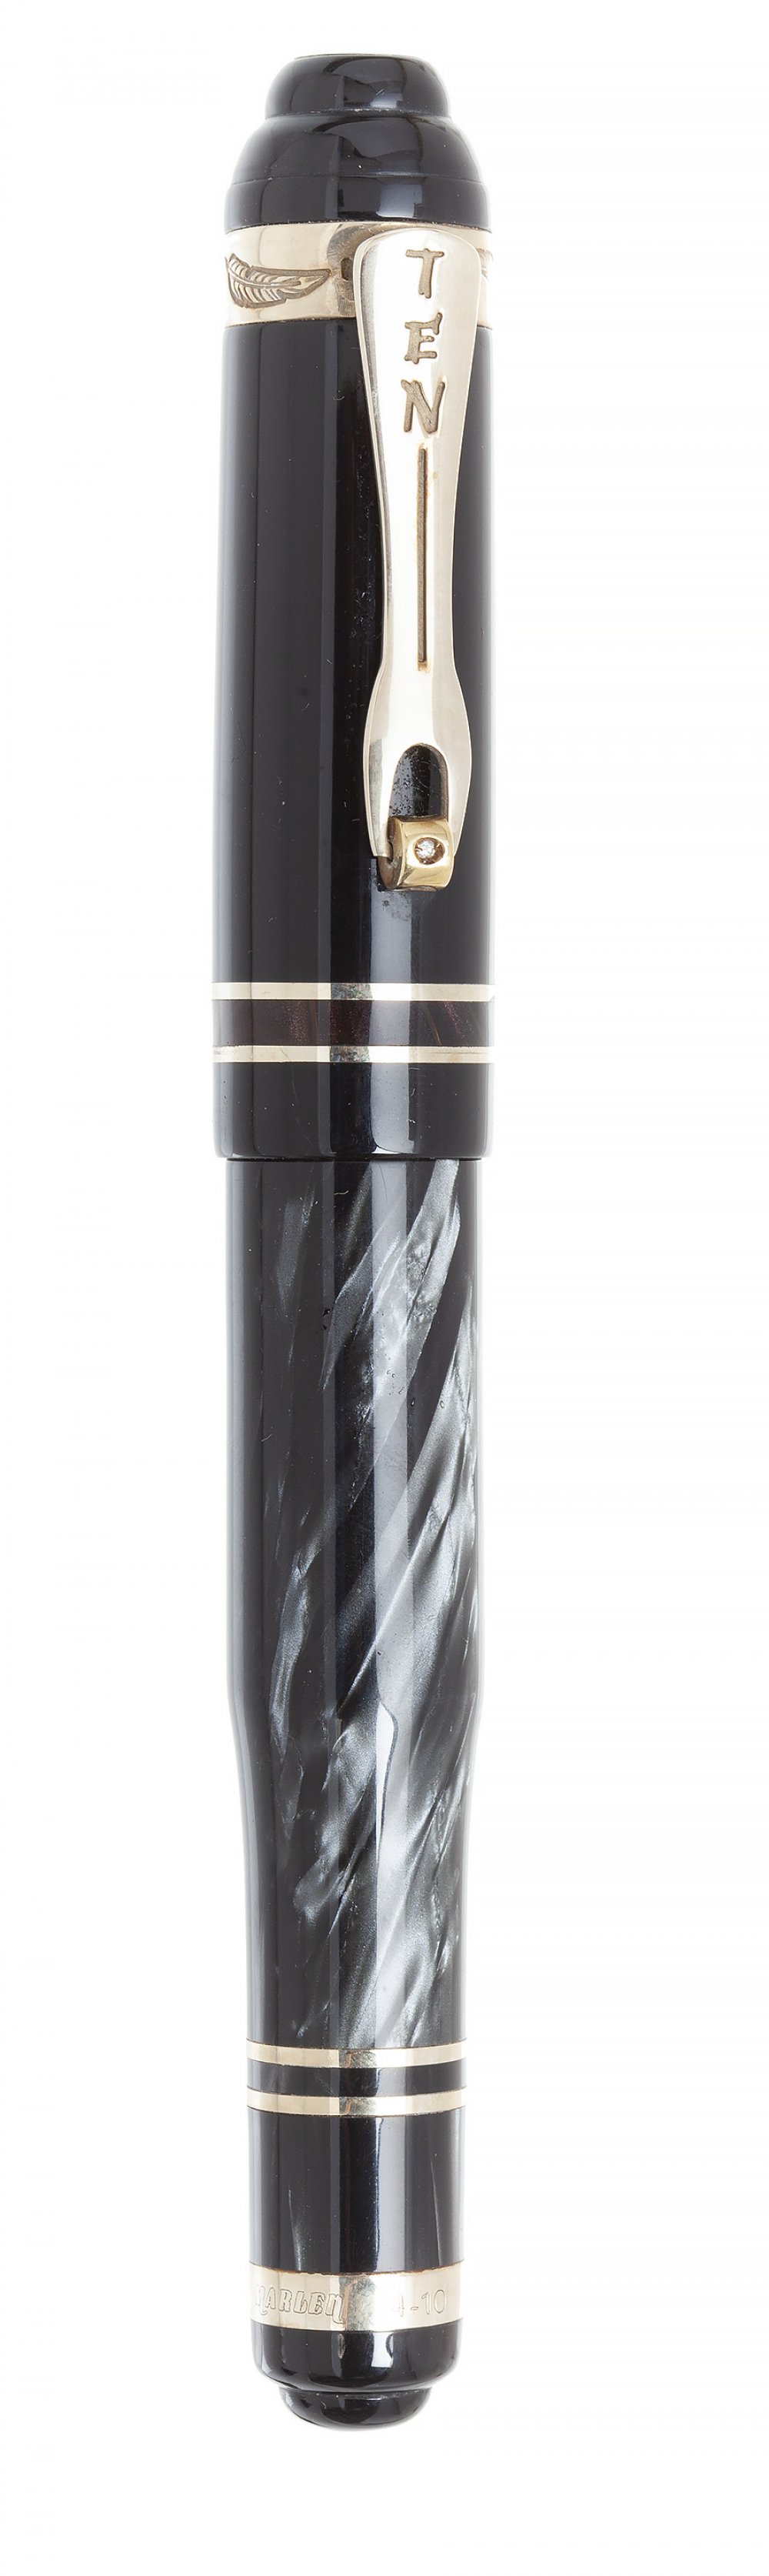 MARLEN "TEN" FOUNTAIN PEN.Black resin barrel with silver accents.Limited edition.Two-tone 18kt